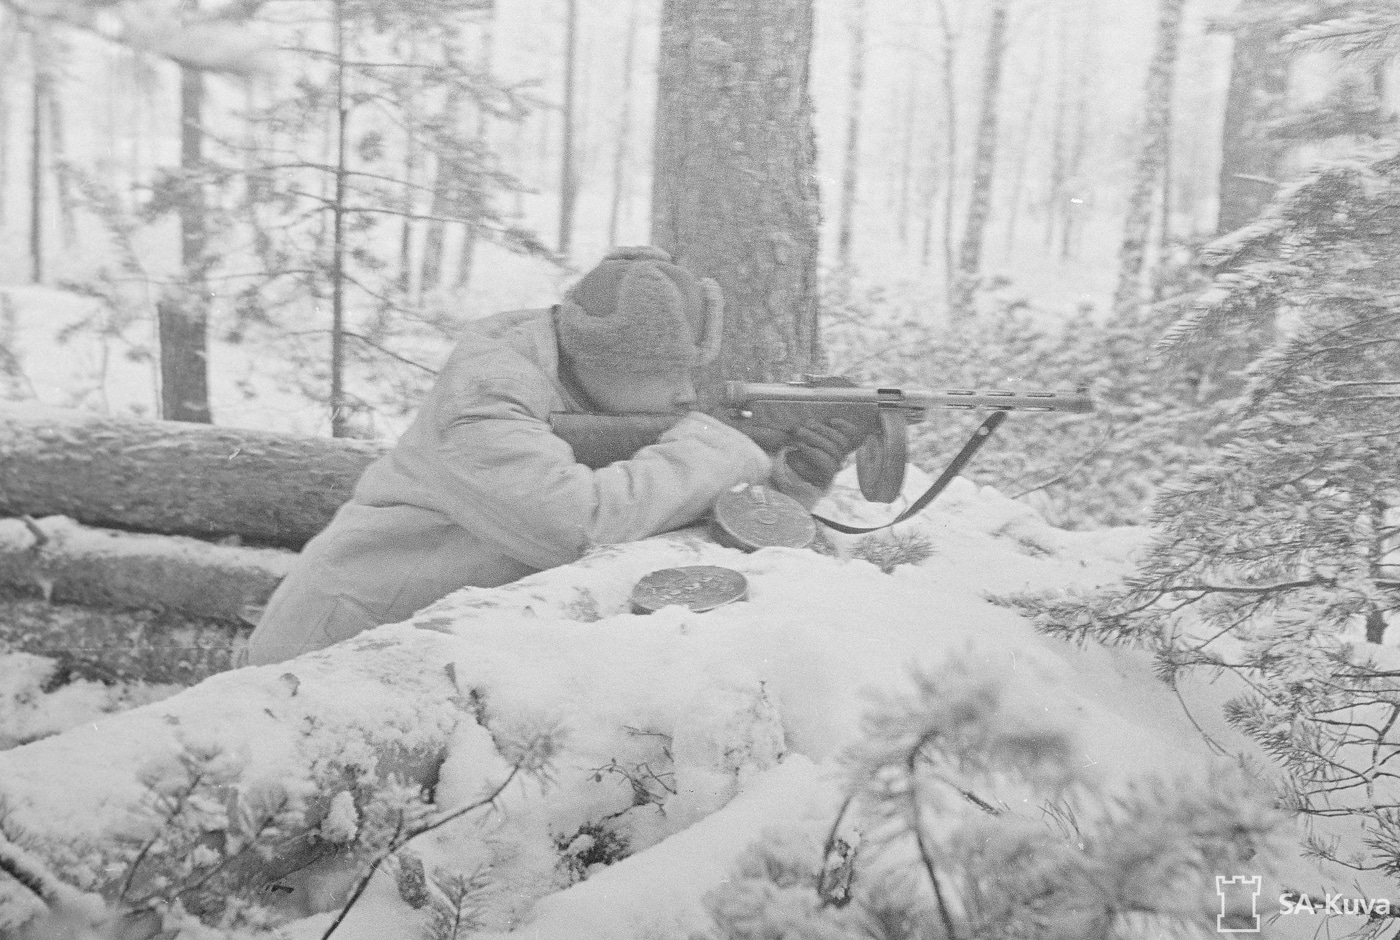 finnish soldier in defensive position with suomi kp -31 model 1931 smg sub machine gun ostrobothnia snow entrenched fortified